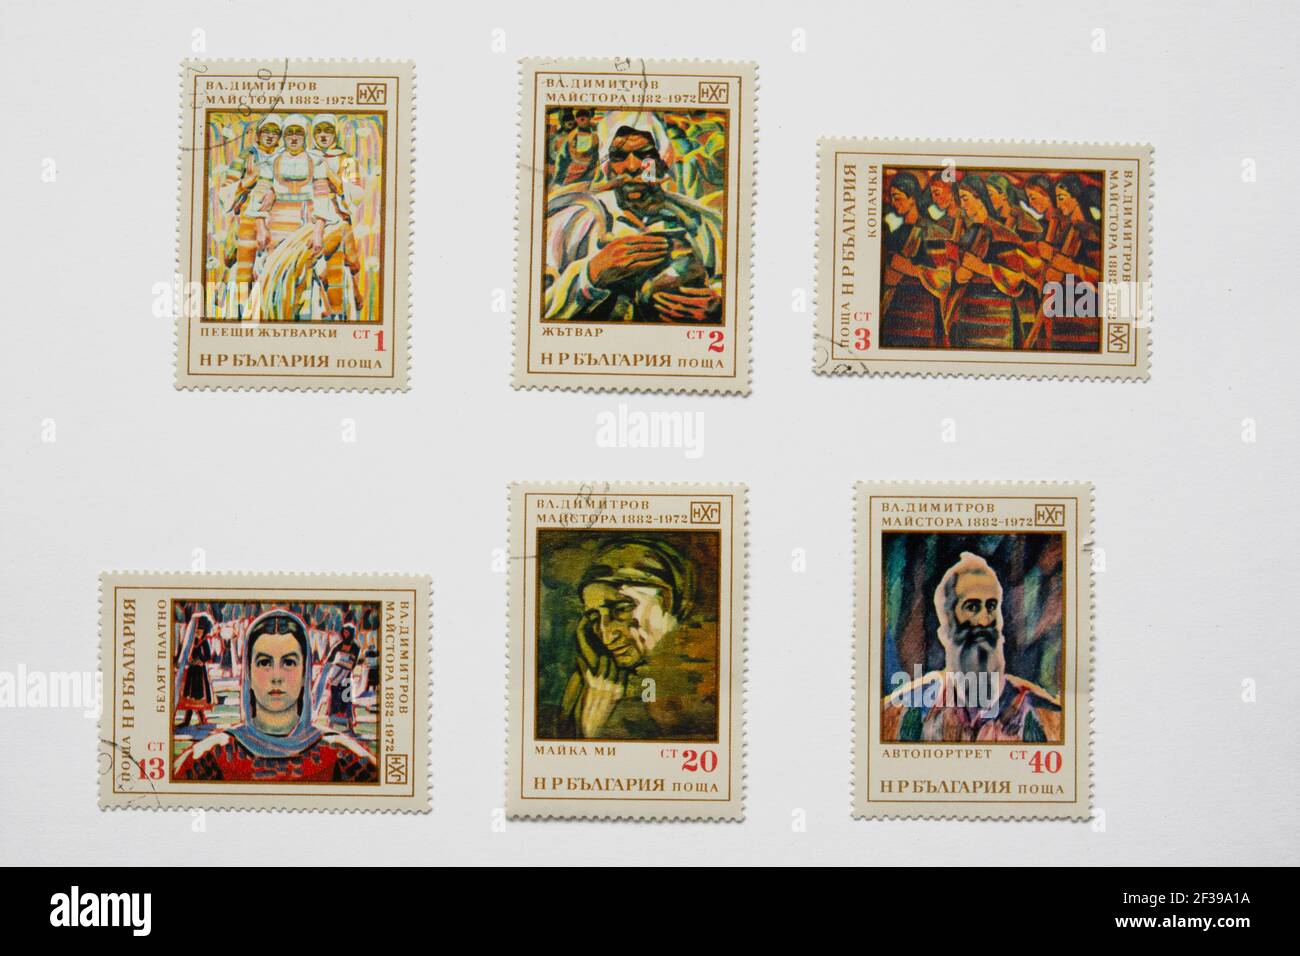 05.03.2021 Istanbul Turkey . BULGARIA - CIRCA 1972: A Stamp printed in Bulgaria shows a series of images 'The paintings of Bulgarian artists' Stock Photo